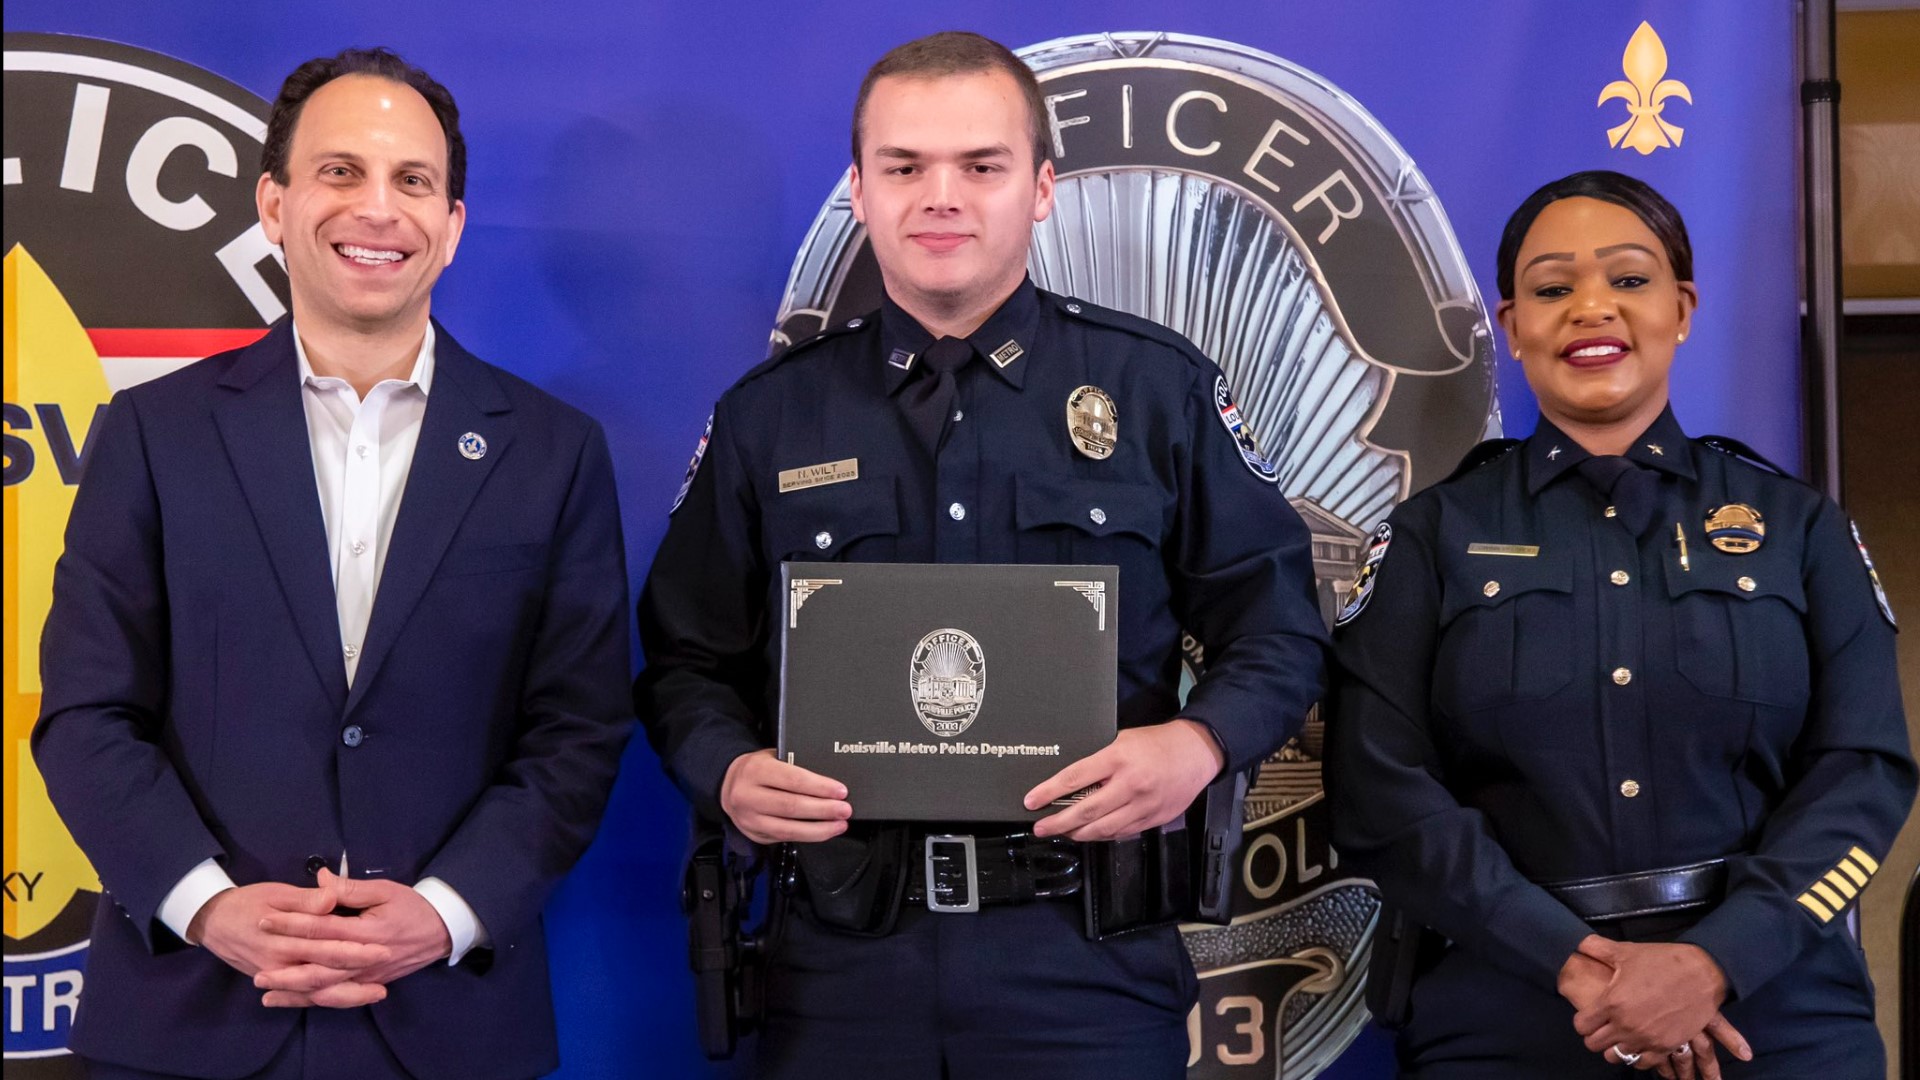 Officer Nickolas Wilt, a new officer to the LMPD, ran towards the gunfire to save lives, police said.